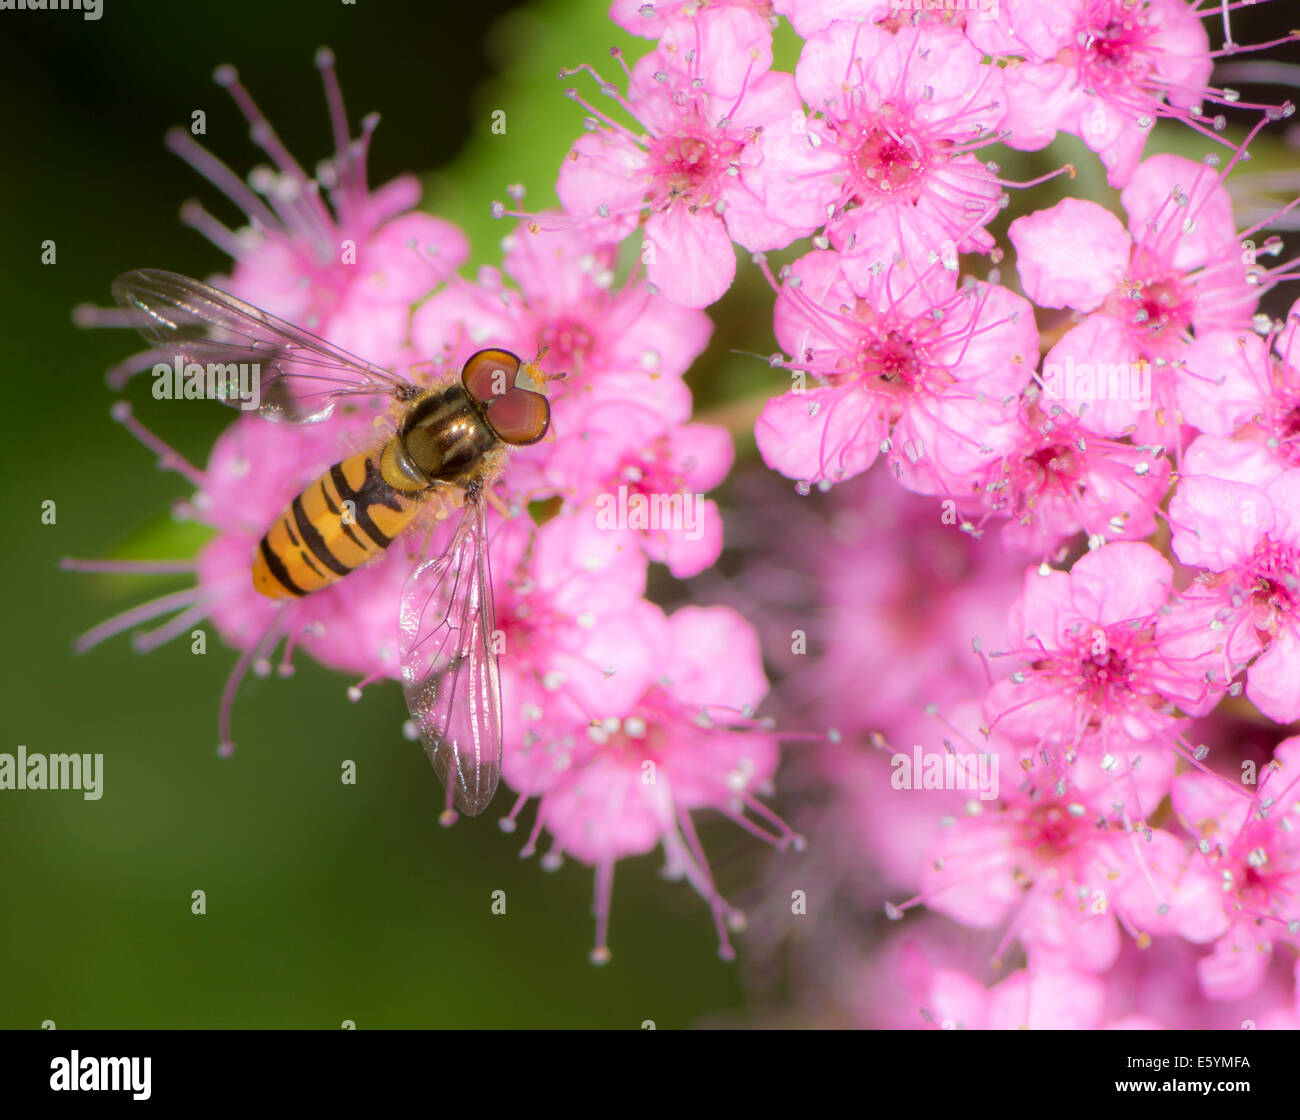 Hoverfly at pink flower blossoms Stock Photo